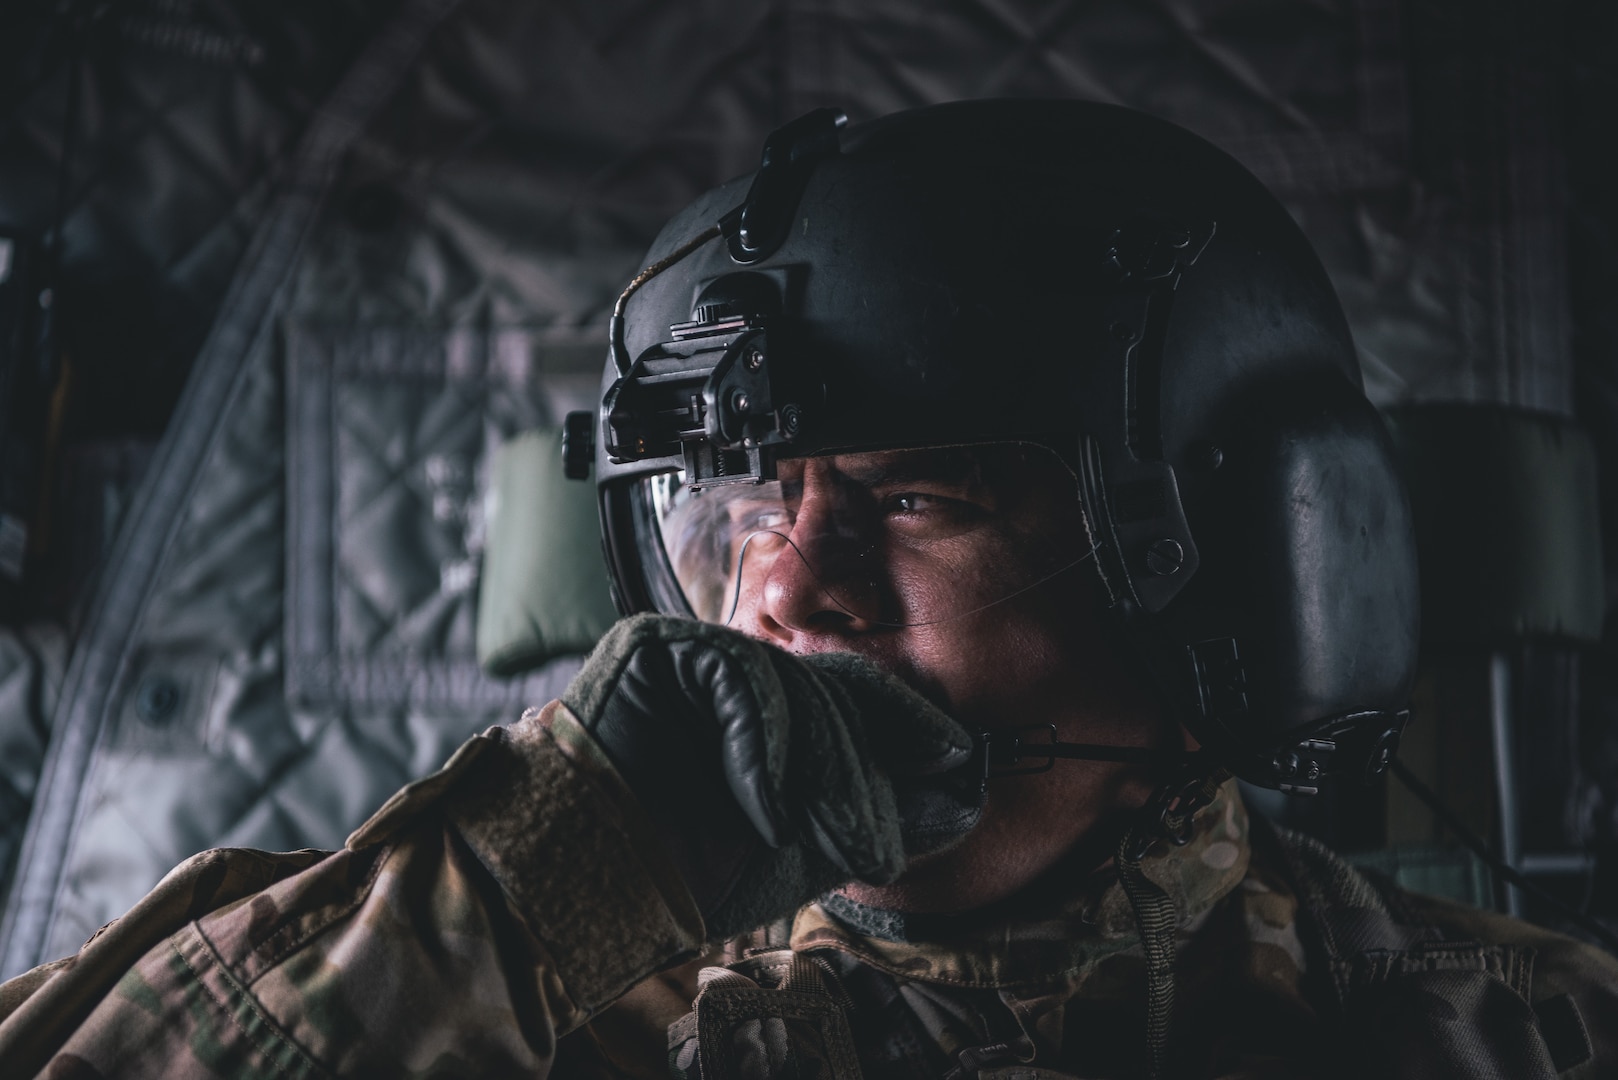 Sergeant Manuel Acevedo uses his headset to communicate with additional aircrew members of a CH-47 Chinook helicopter at Kelly Field Annex, San Antonio, TX, Feb 1, 2019.